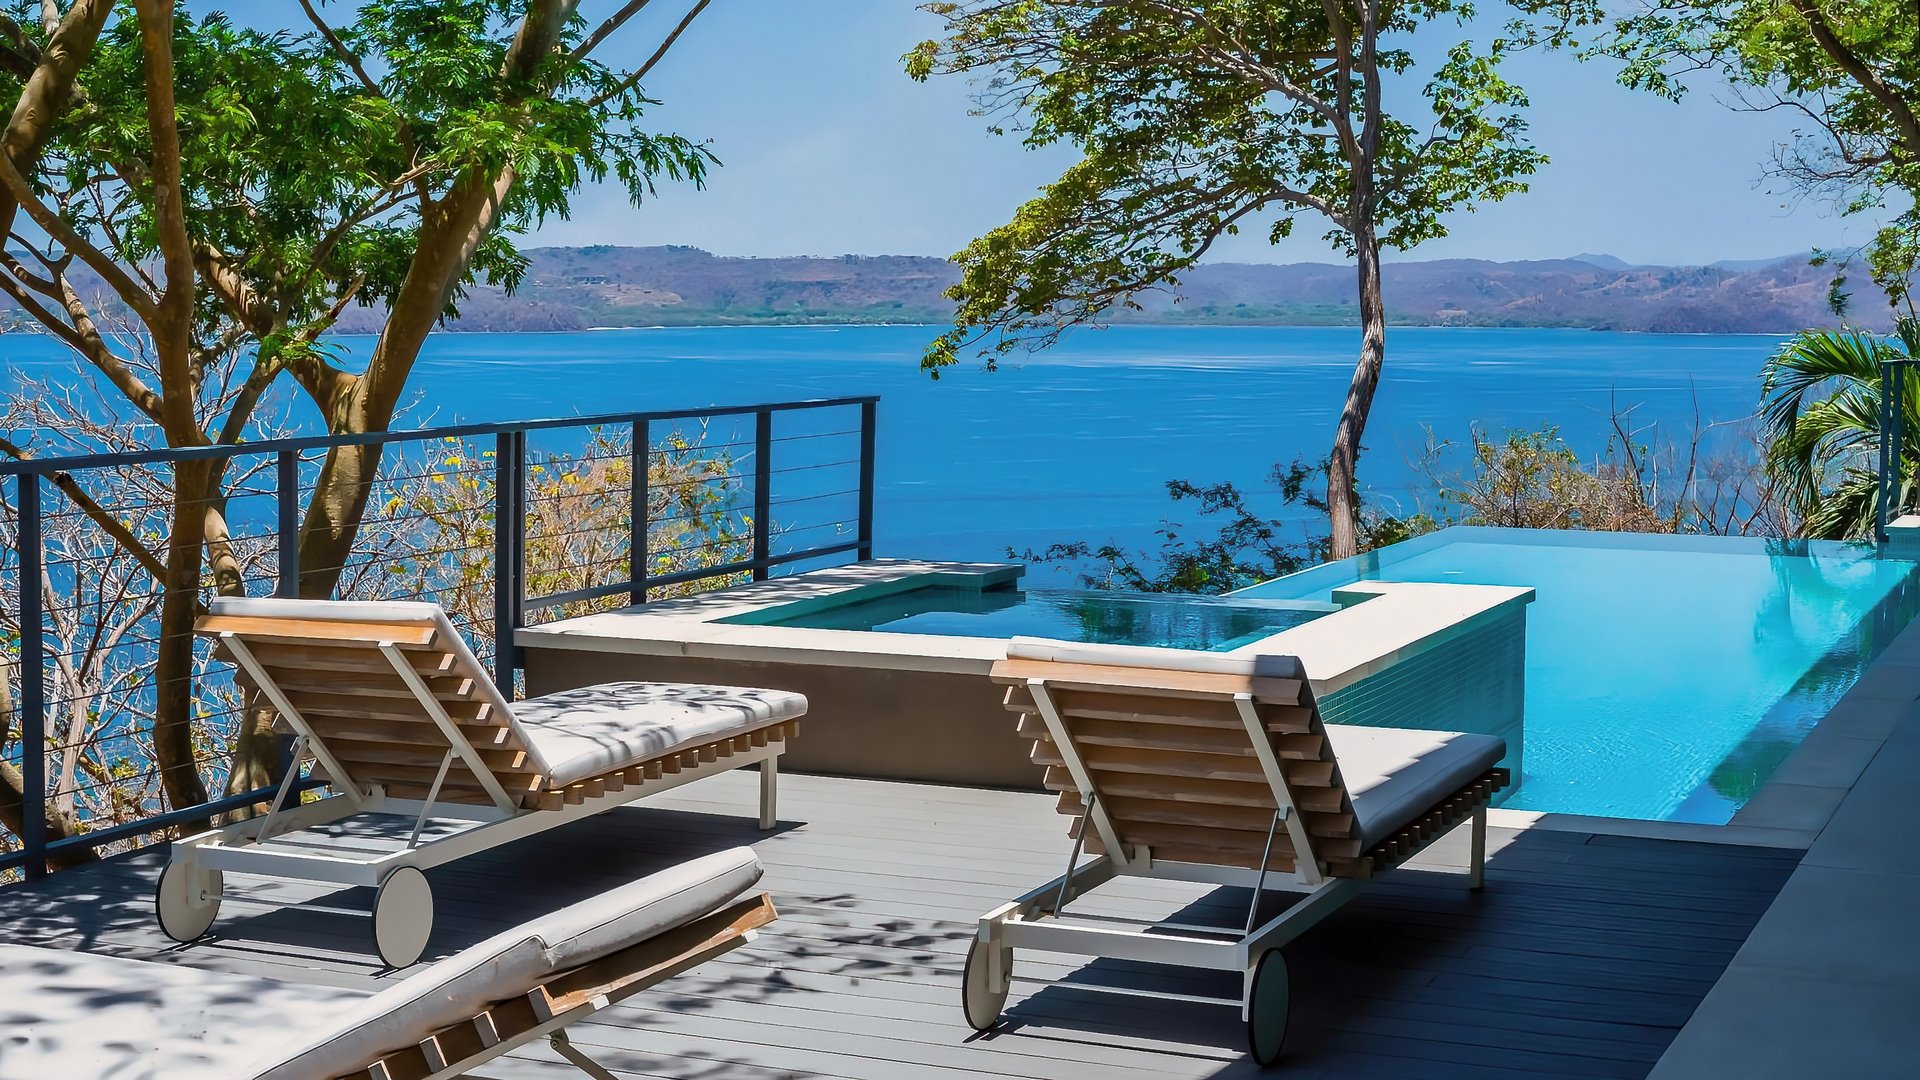 10162-The swimming pool of the luxury home along Papagayo Gulf, Costa Rica